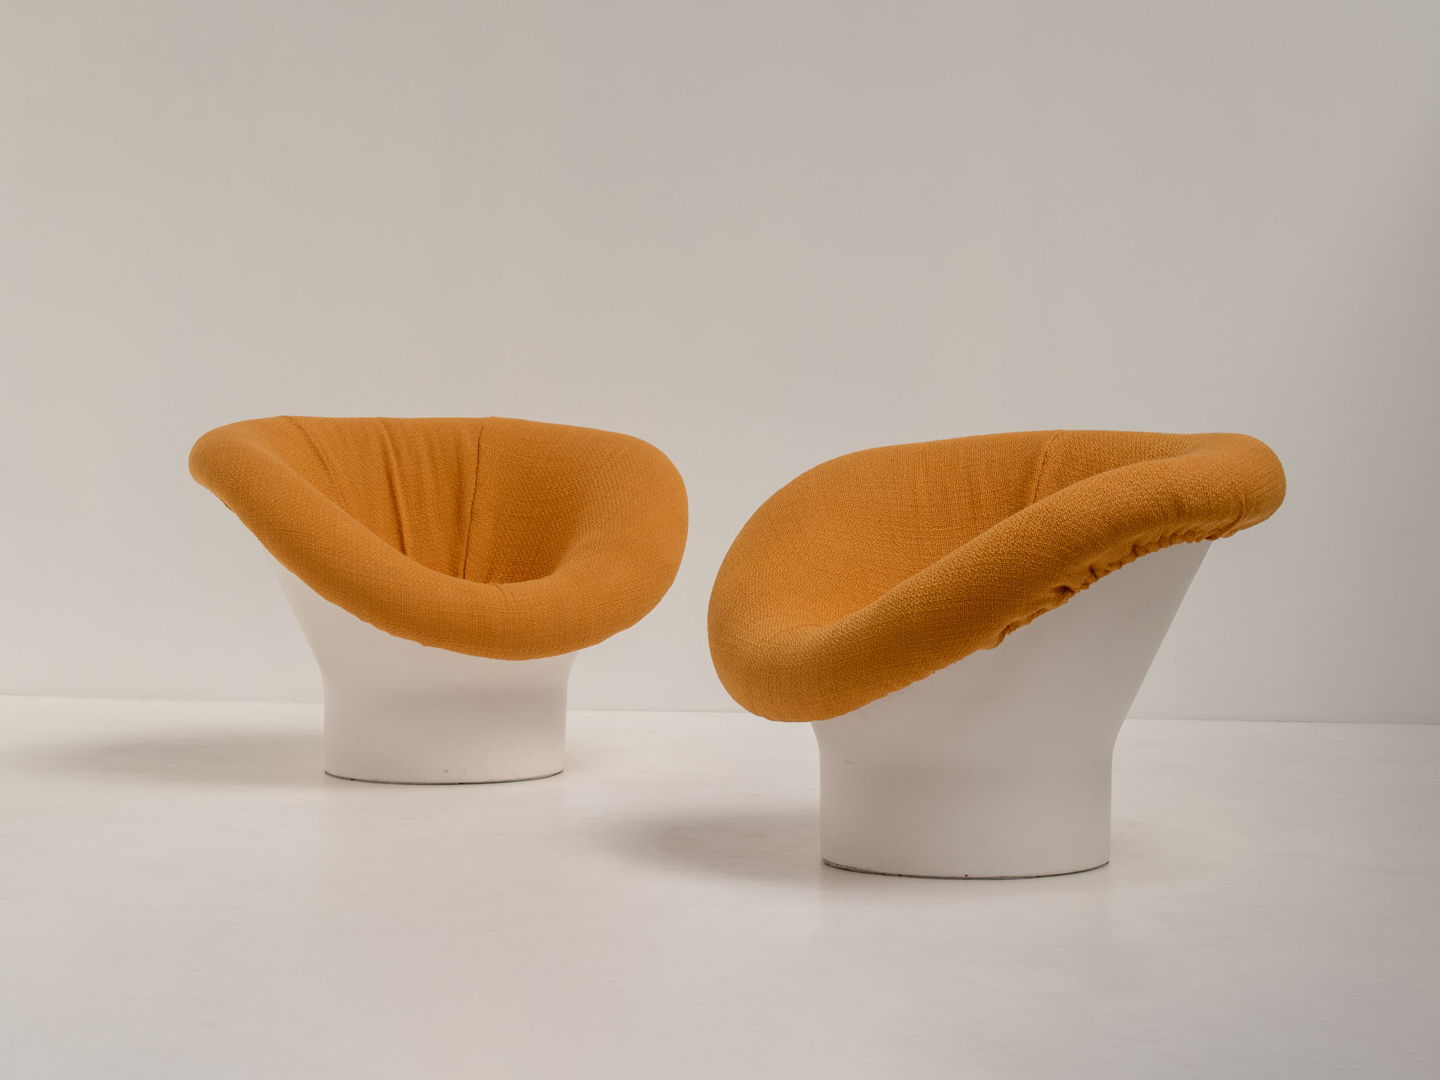 Pair of Krokus Lounge Chairs by Lennart Bender for Ulferts, Sweden 1960s